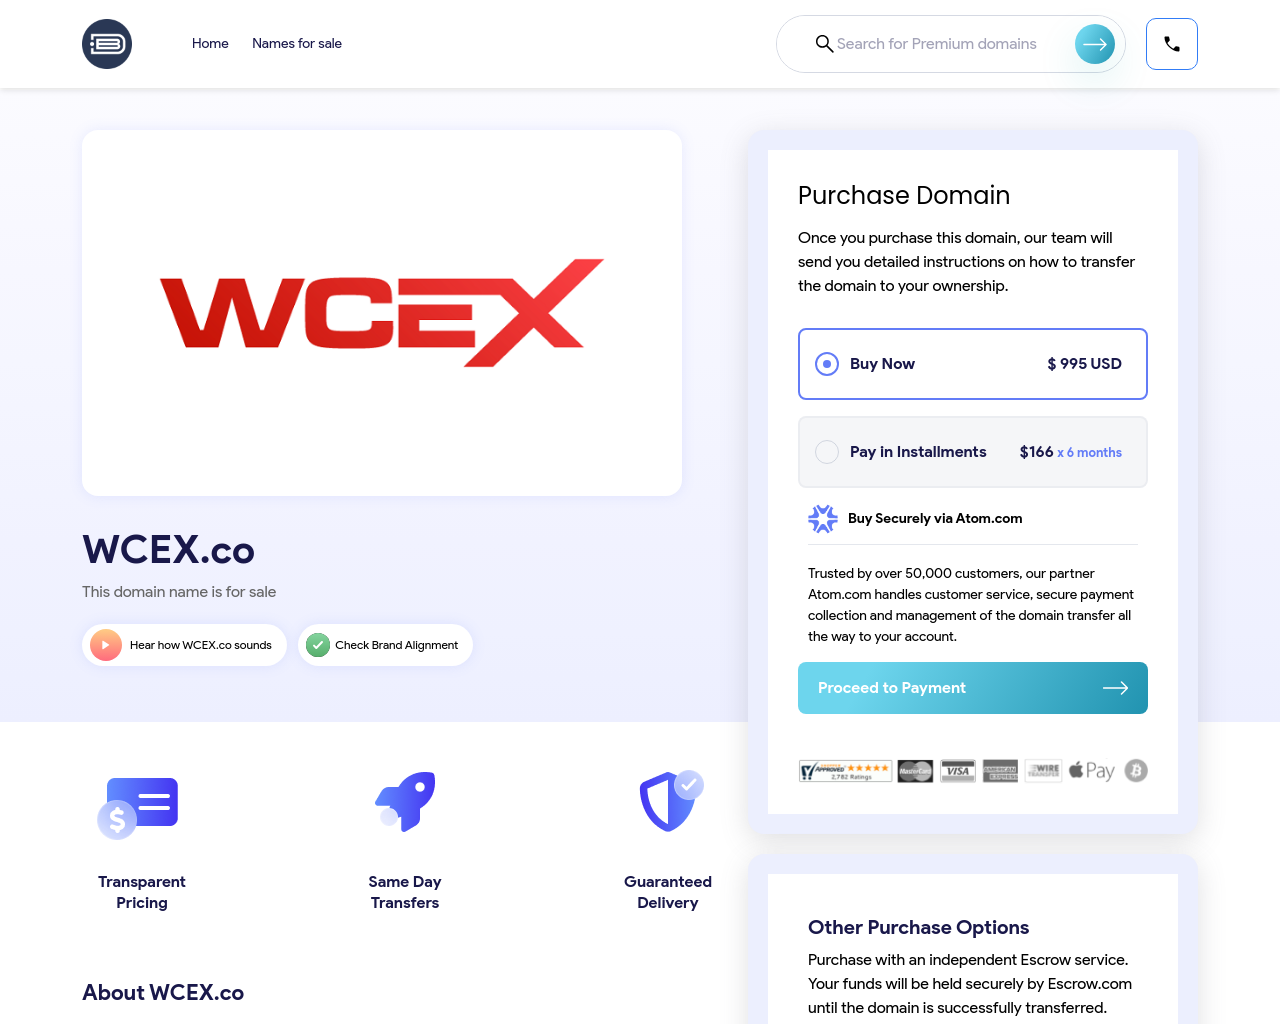 wcex.co